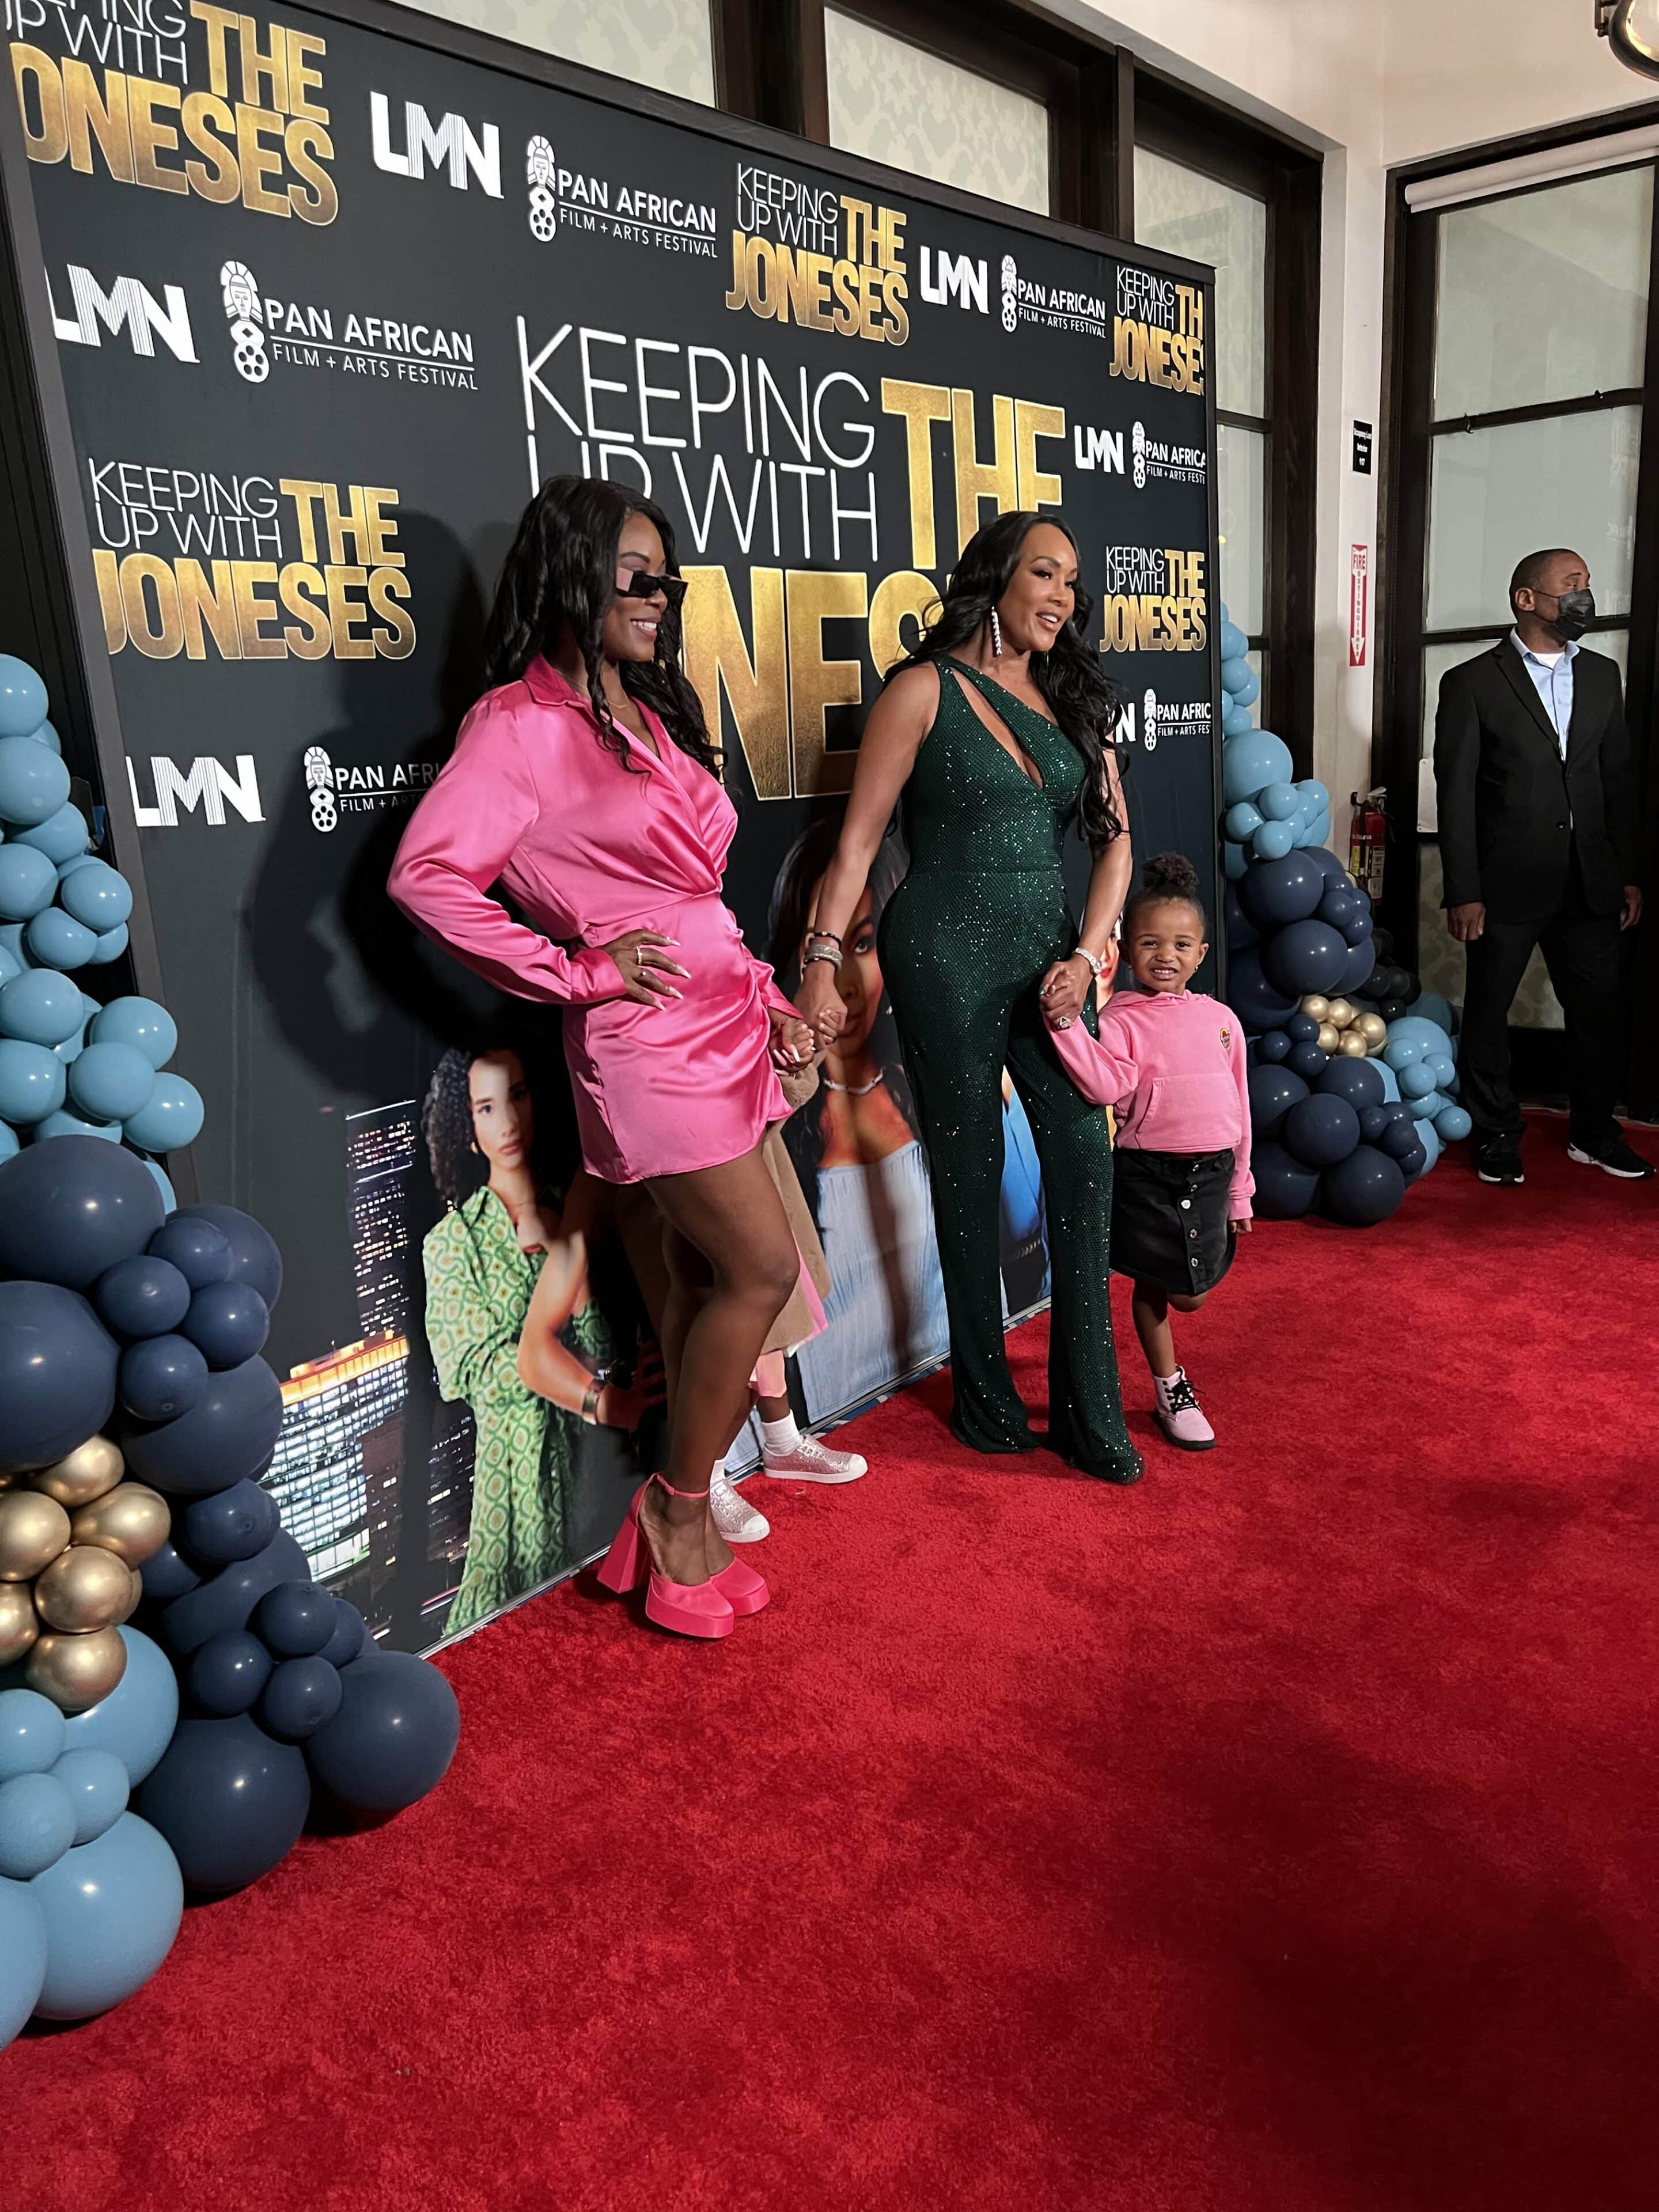 Vivica A Fox (Keeping Up with the Joneses) - red carpet